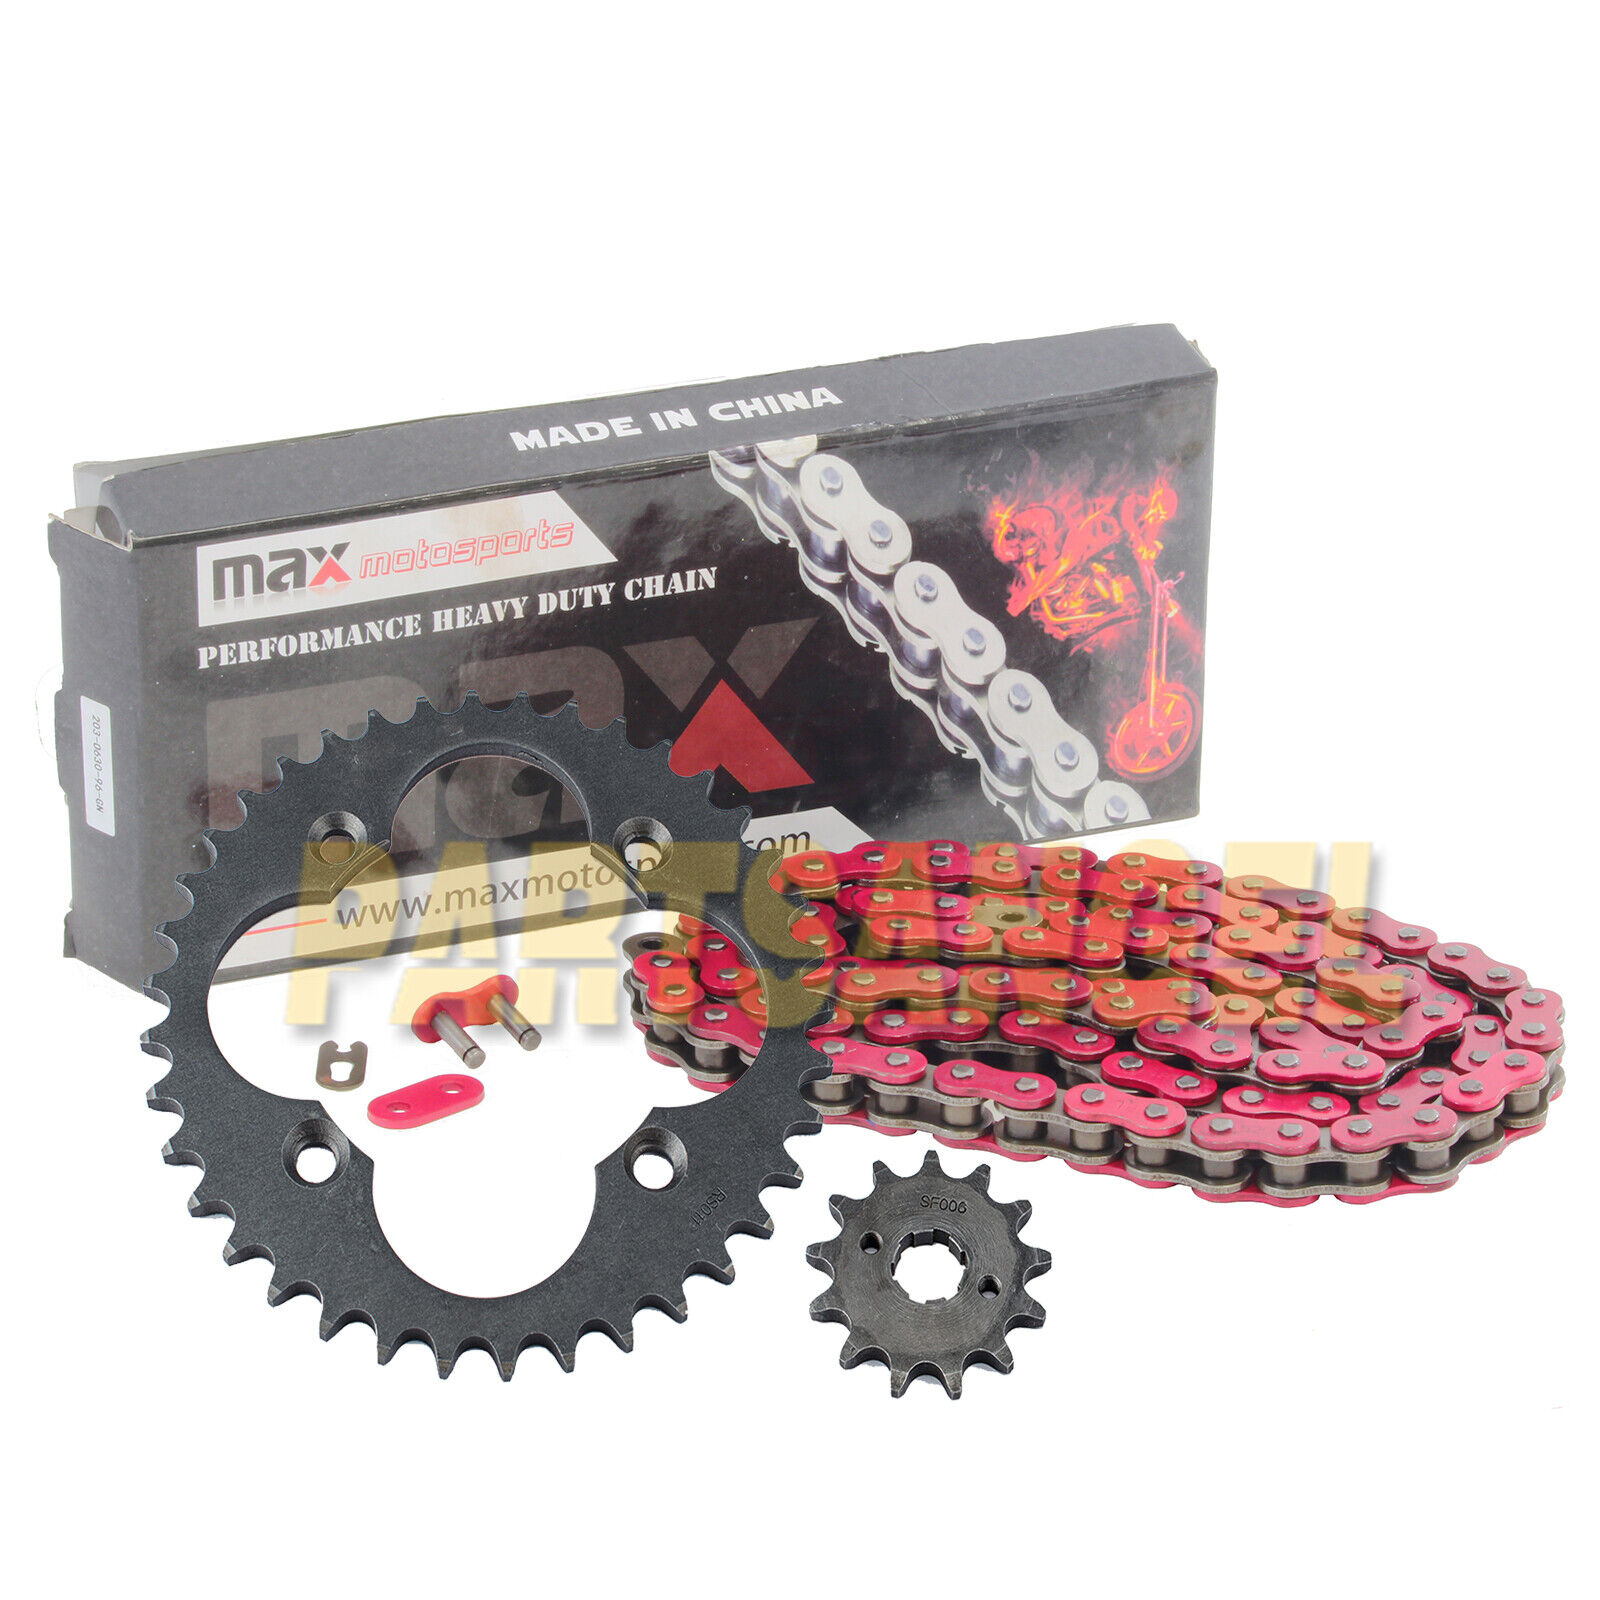 Red Drive Chain And Sprockets Kit for Honda TRX300EX Sportrax 300 2X4 1993-2008